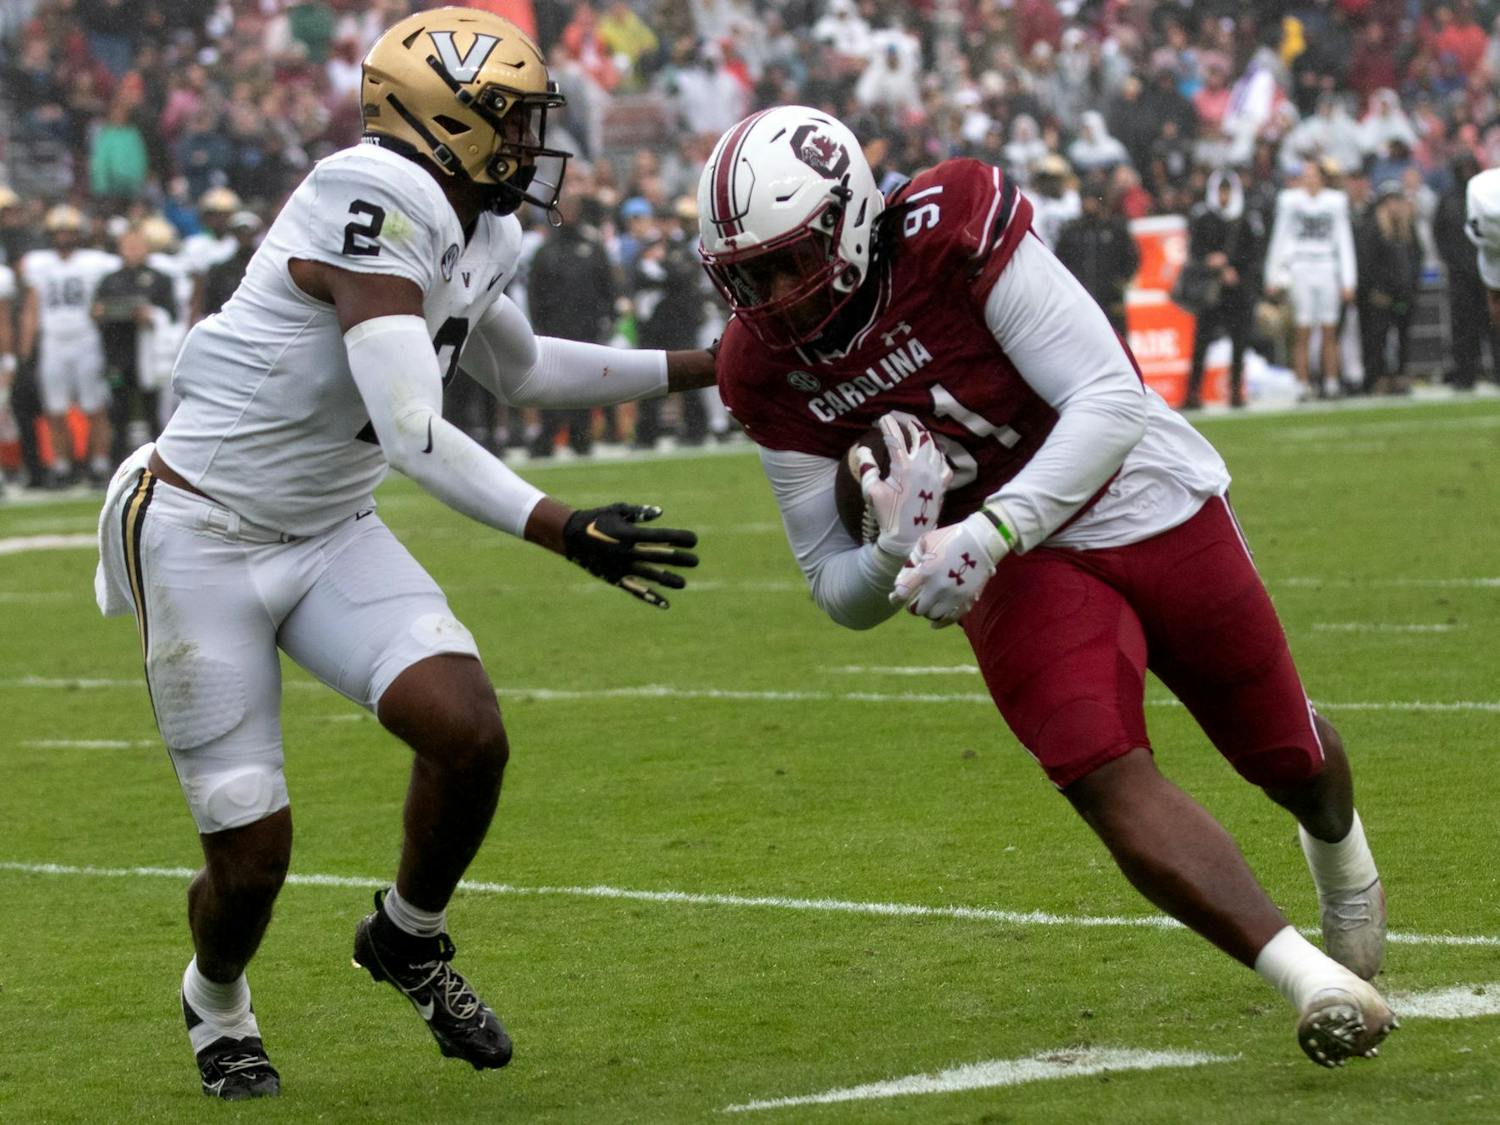 Senior defensive tackle Tonka Hemingway runs with the ball during the Gamecocks' 47-6 victory over the Commodores. Hemingway totaled five tackles in the game, bringing him to 30 tackles on the season.